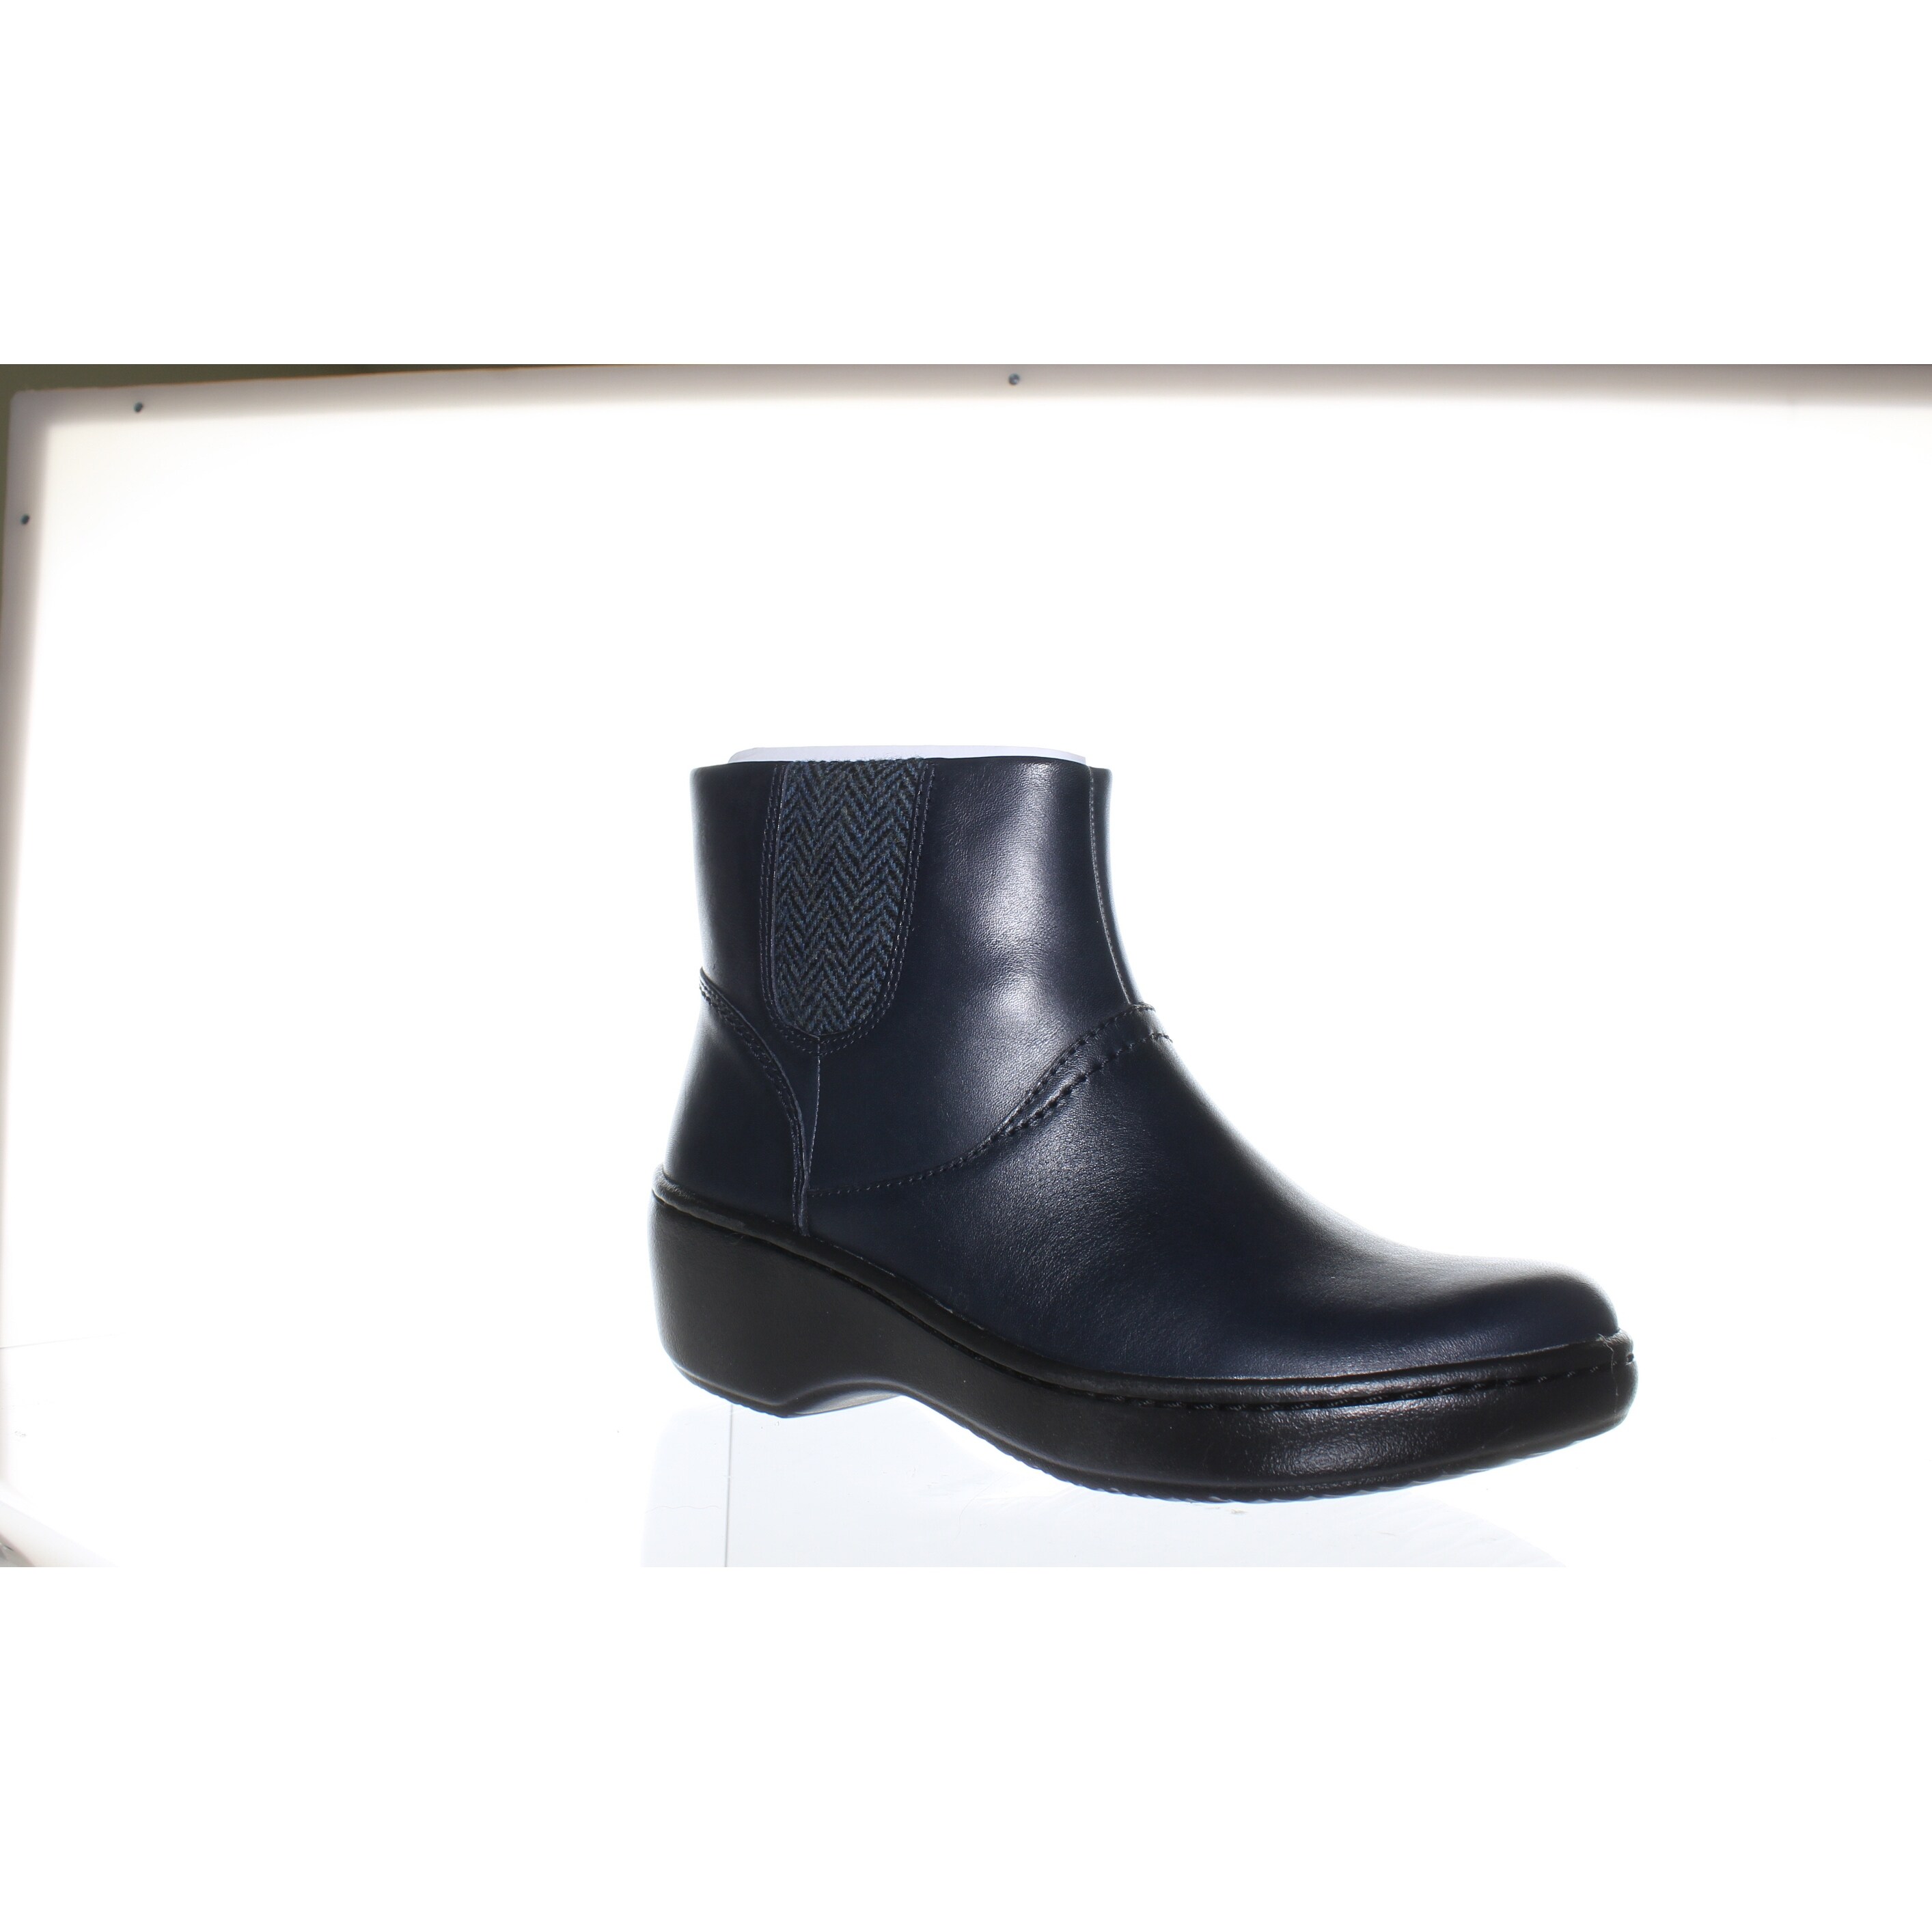 heeled boots size 5